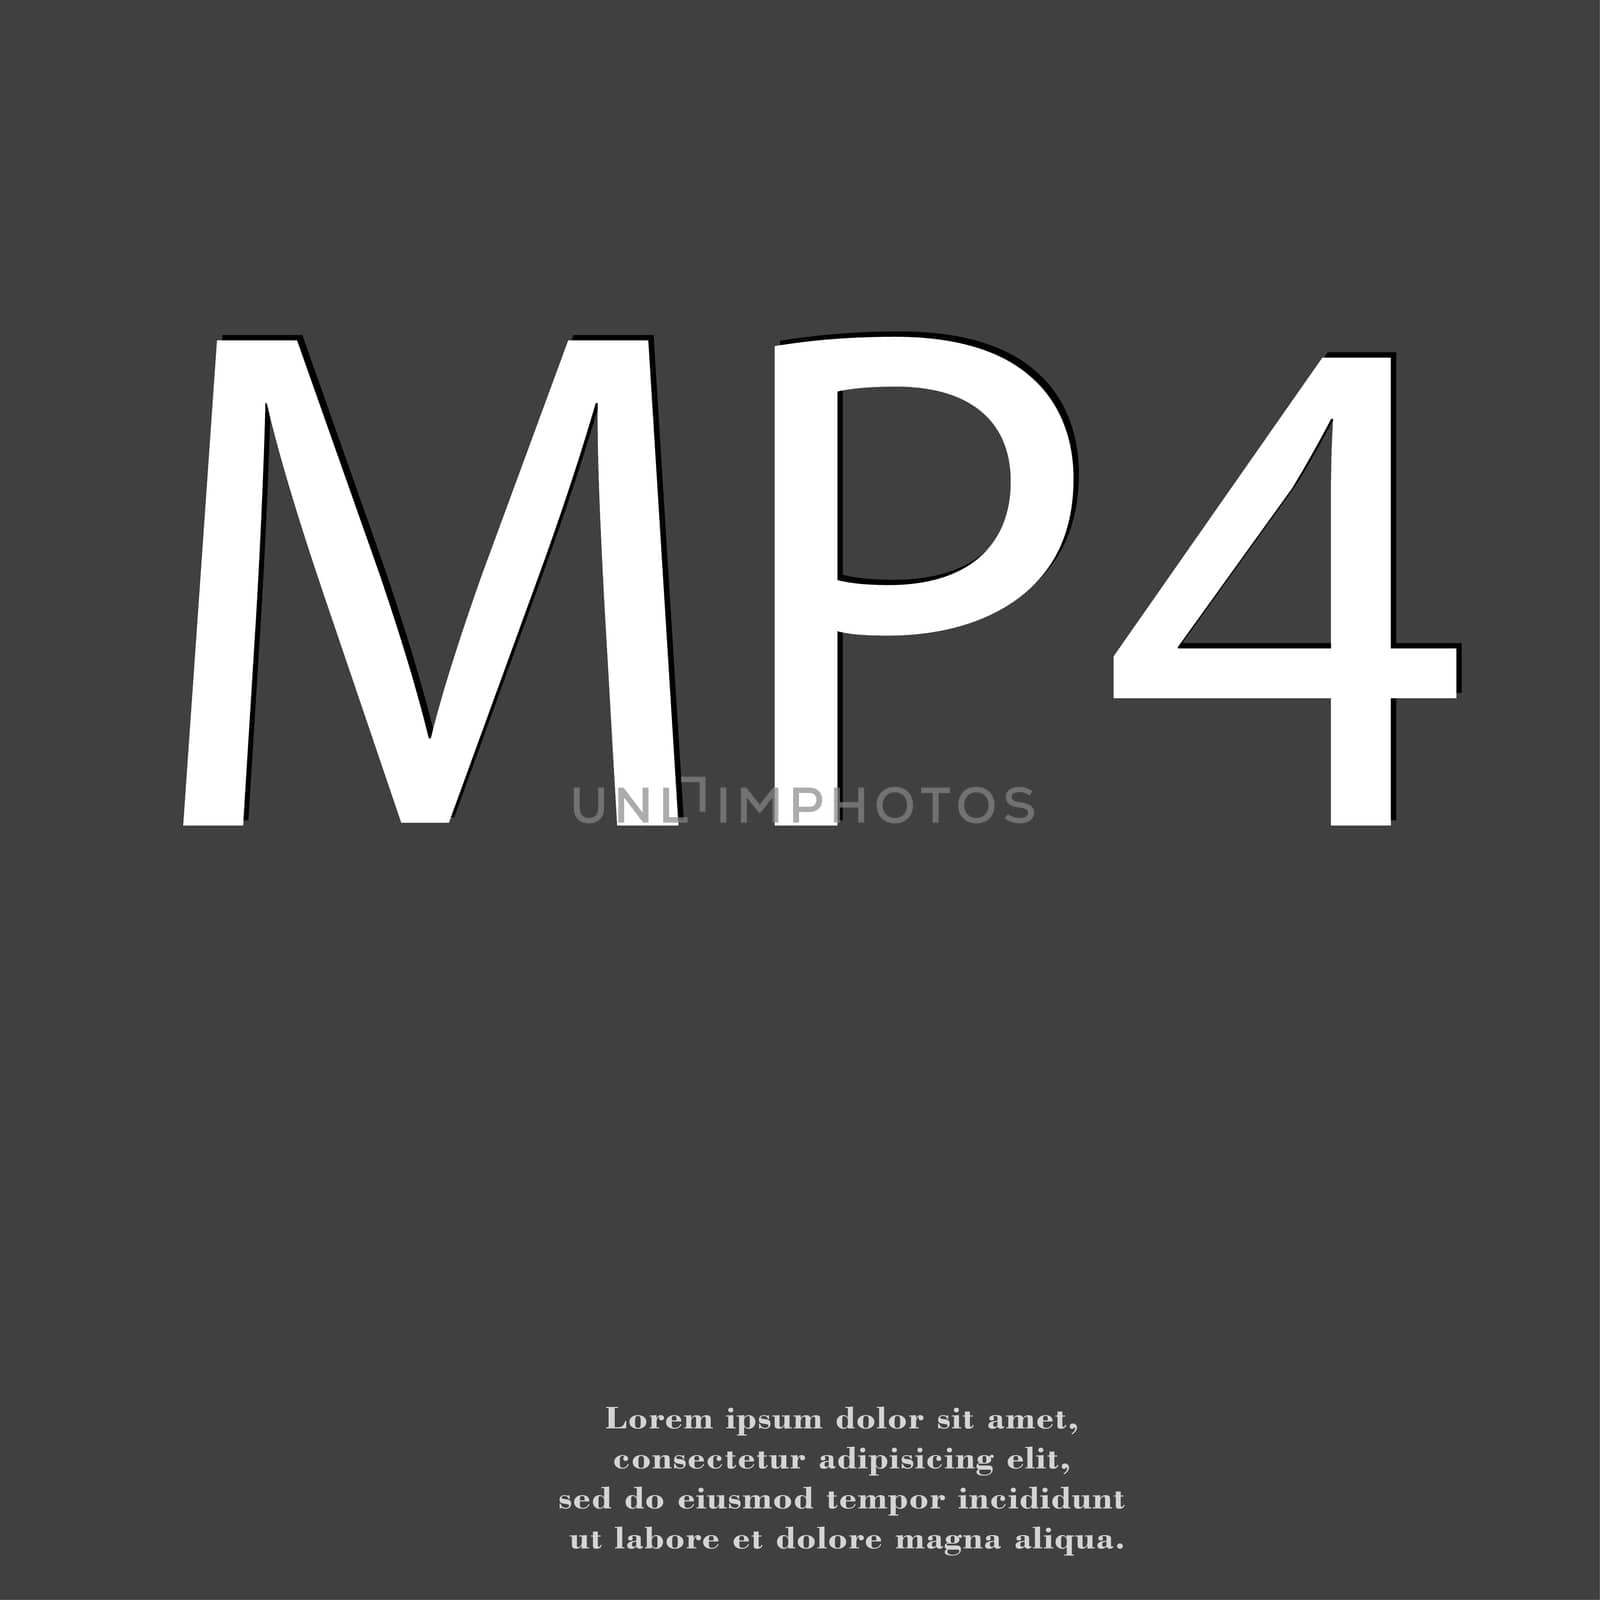 Mpeg4 video format icon symbol Flat modern web design with long shadow and space for your text. illustration